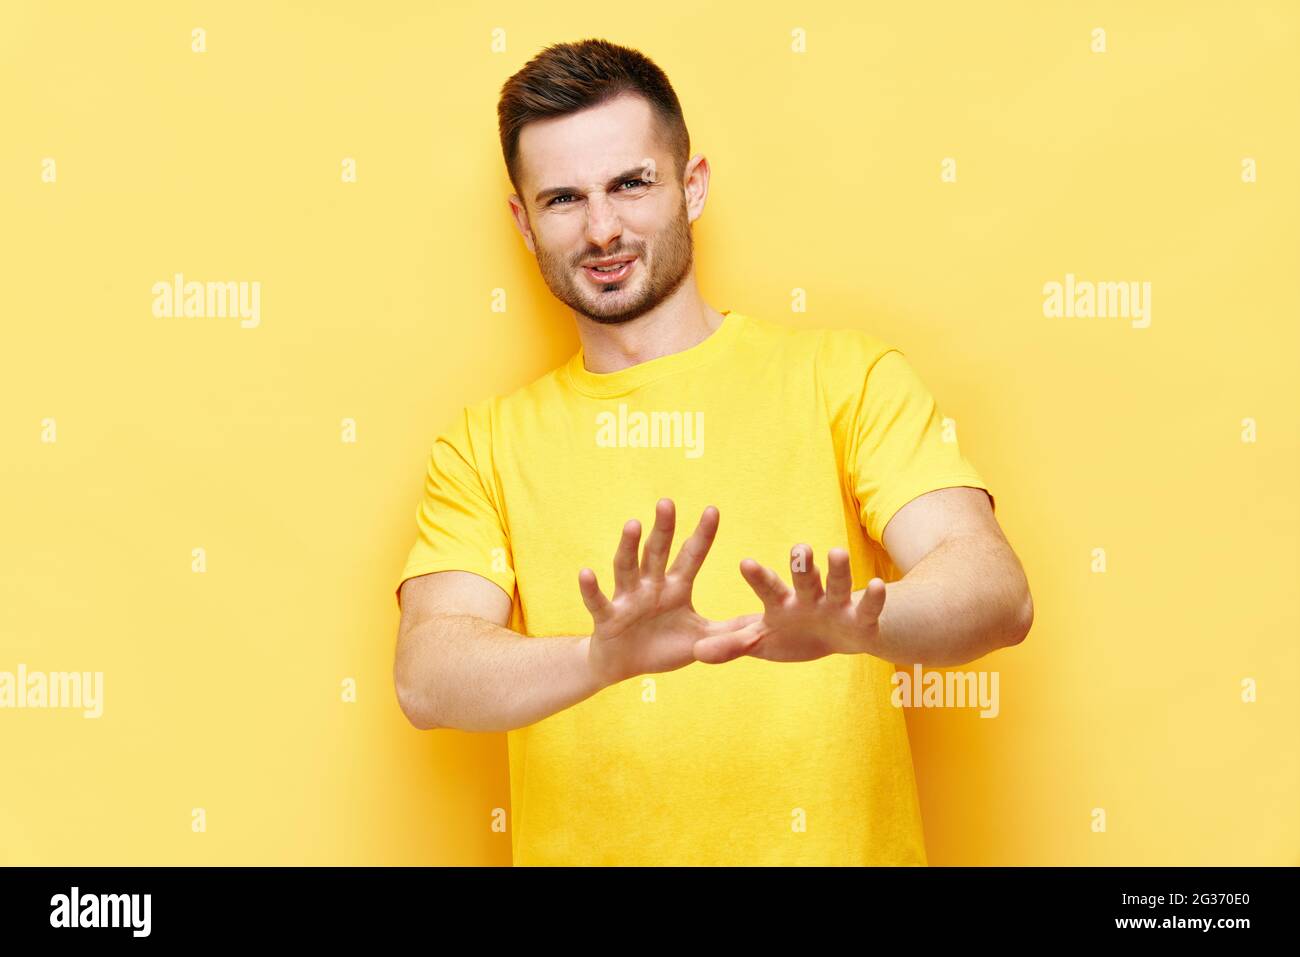 Young displeased man making stop gesture sign say no isolated on yellow background. Negative emotion, facial expression Stock Photo